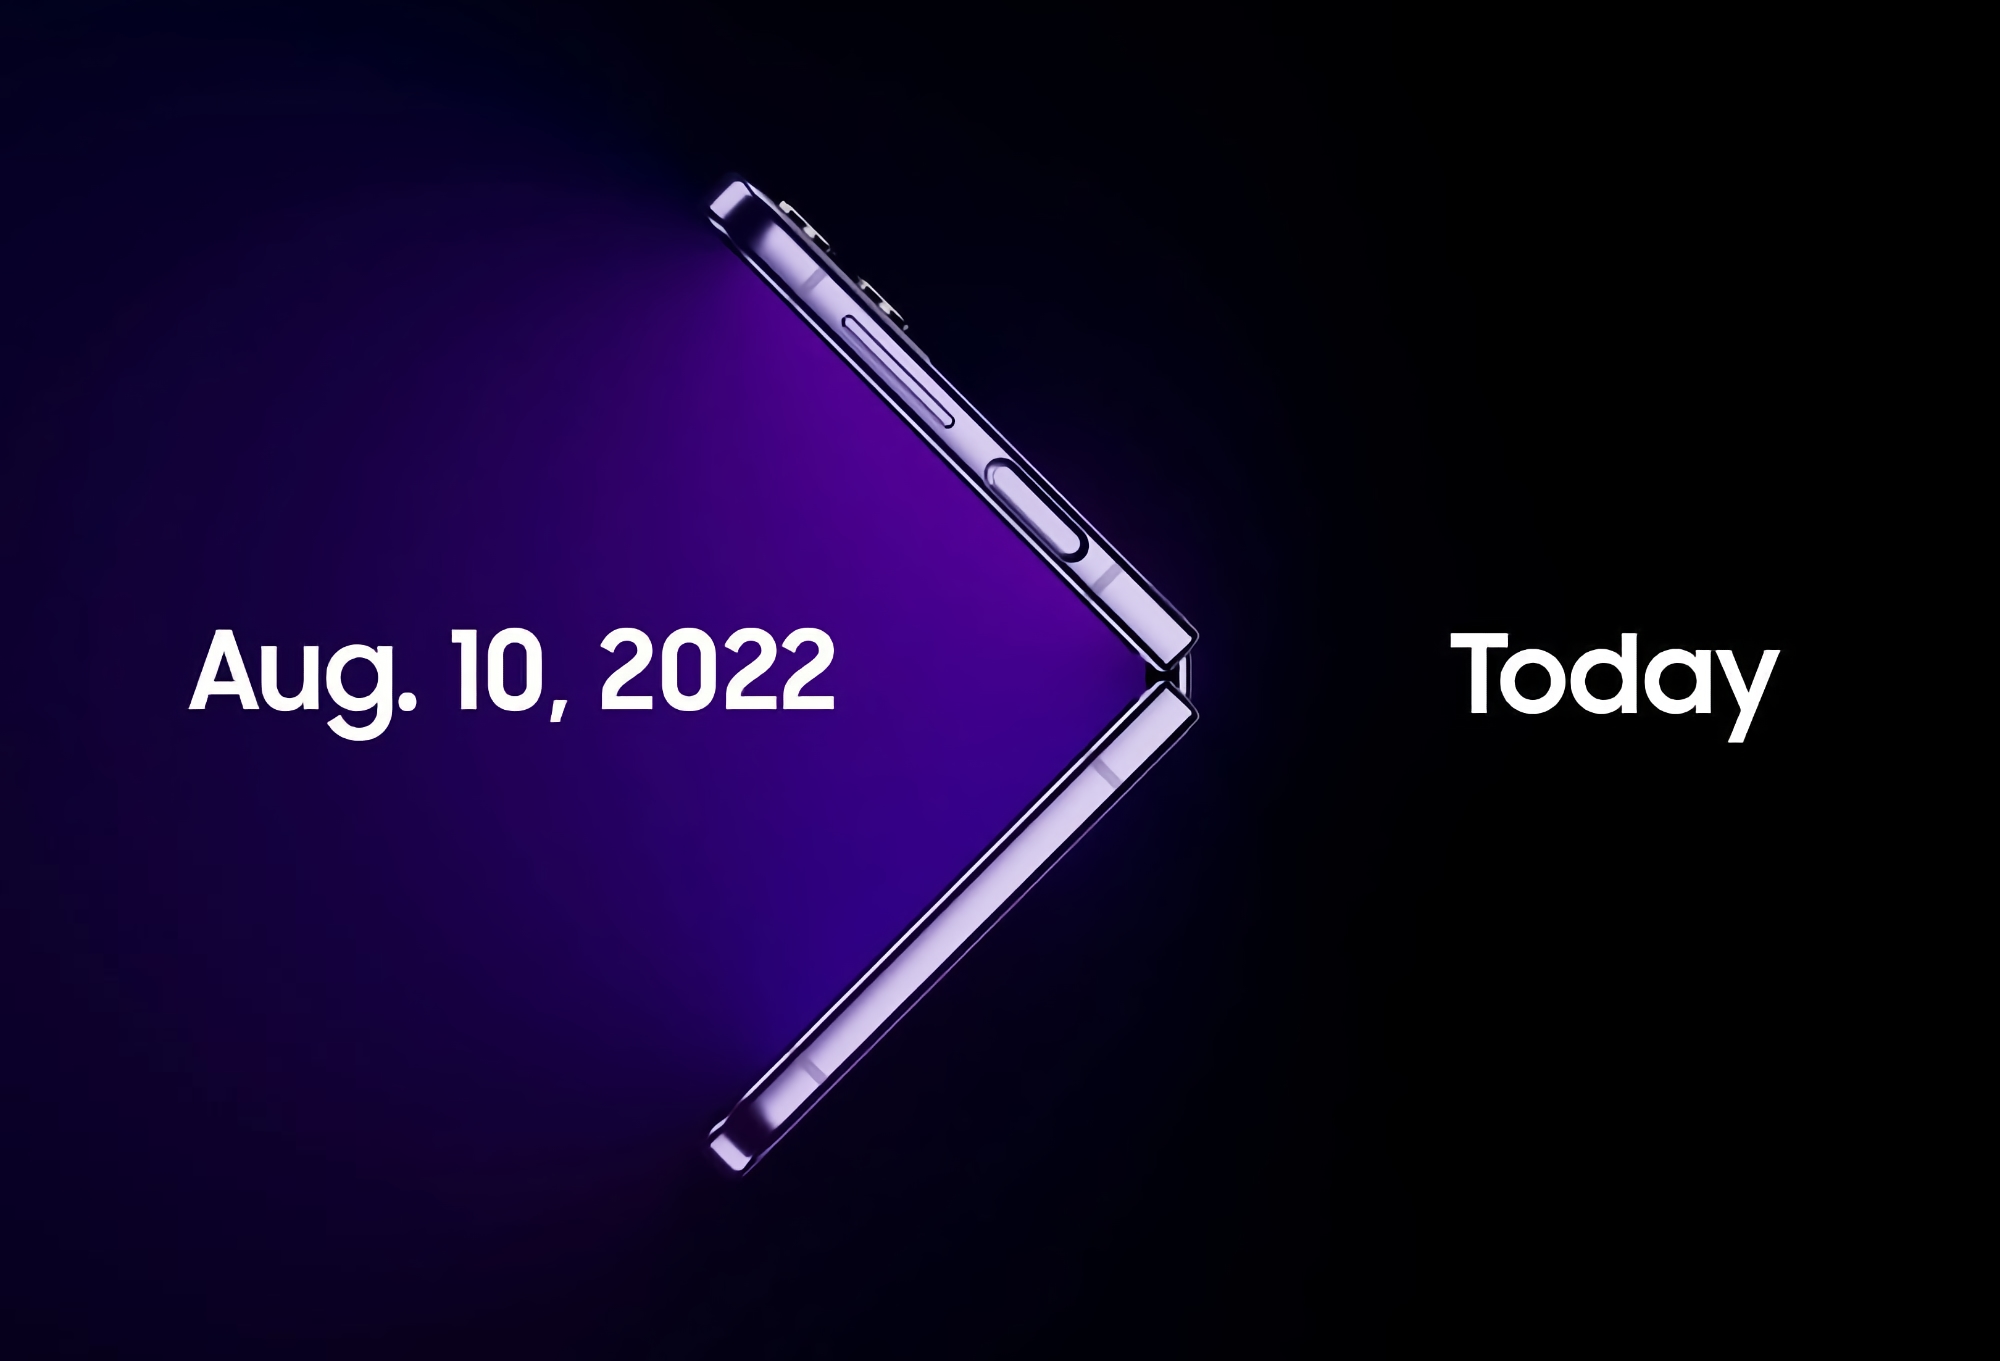 Samsung announced the Galaxy Unpacked presentation on August 10: Expect the Galaxy Fold 4, Galaxy Flip 4, Galaxy Watch 5 smartwatch and Galaxy Buds 2 Pro TWS headphones